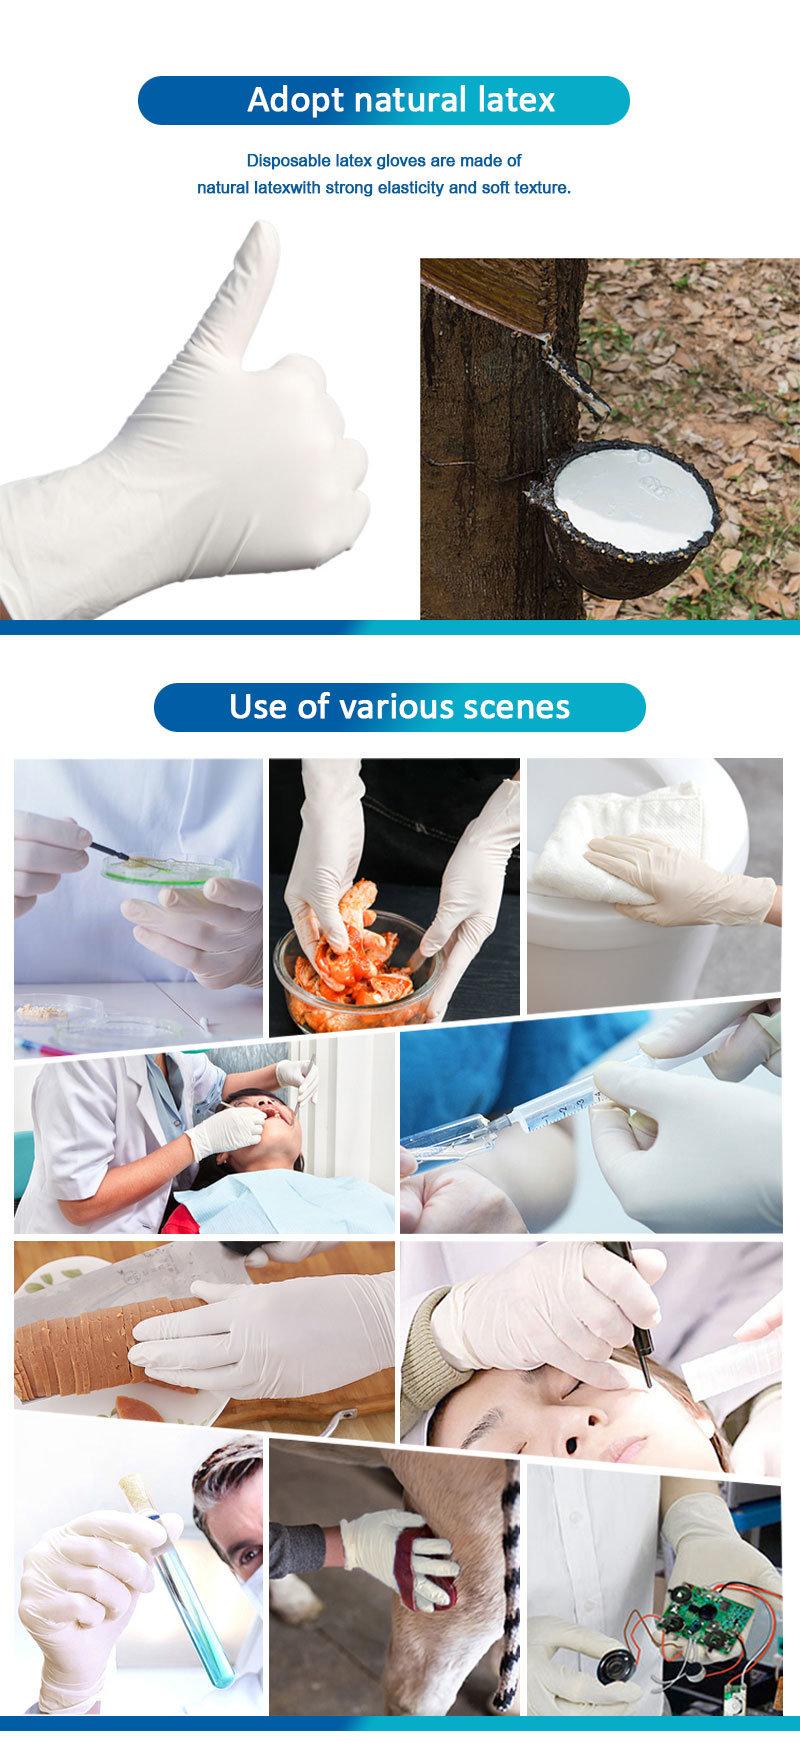 Disposable Non Sterile Latex Surgical Gloves Powder Free Food Blue Disposable Examination Latex Gloves